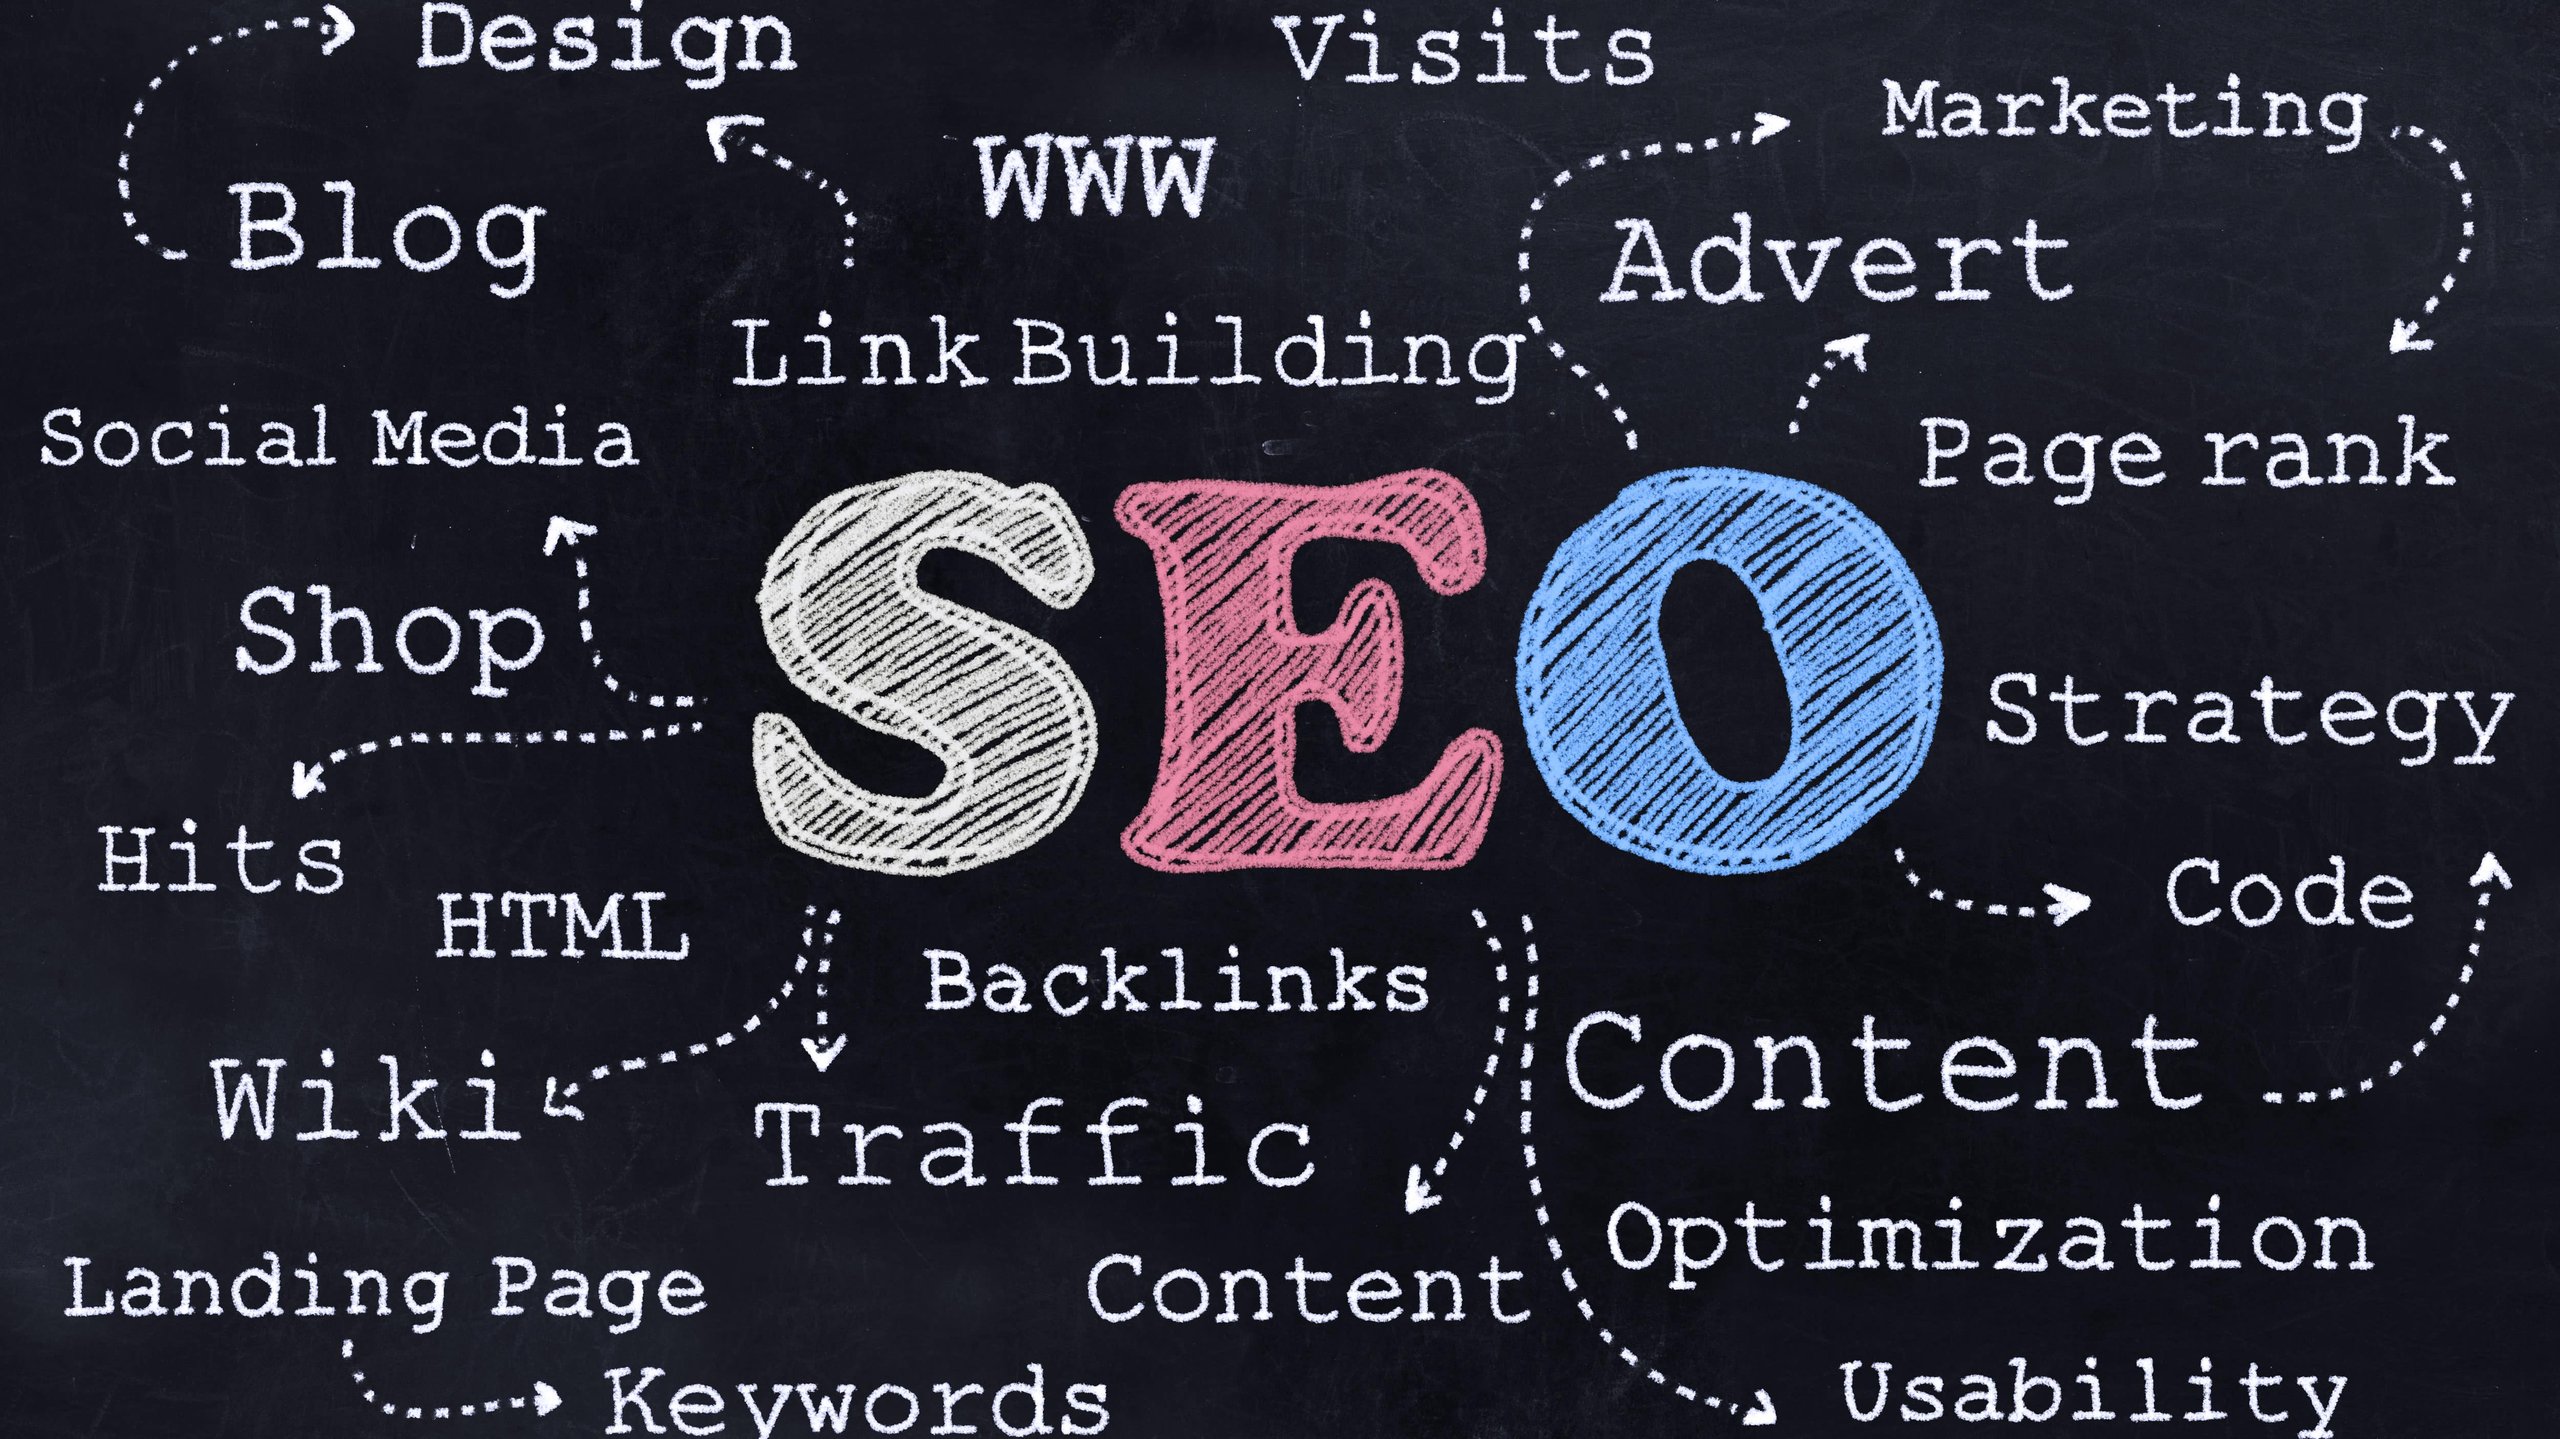 There’s More to SEO than Keywords